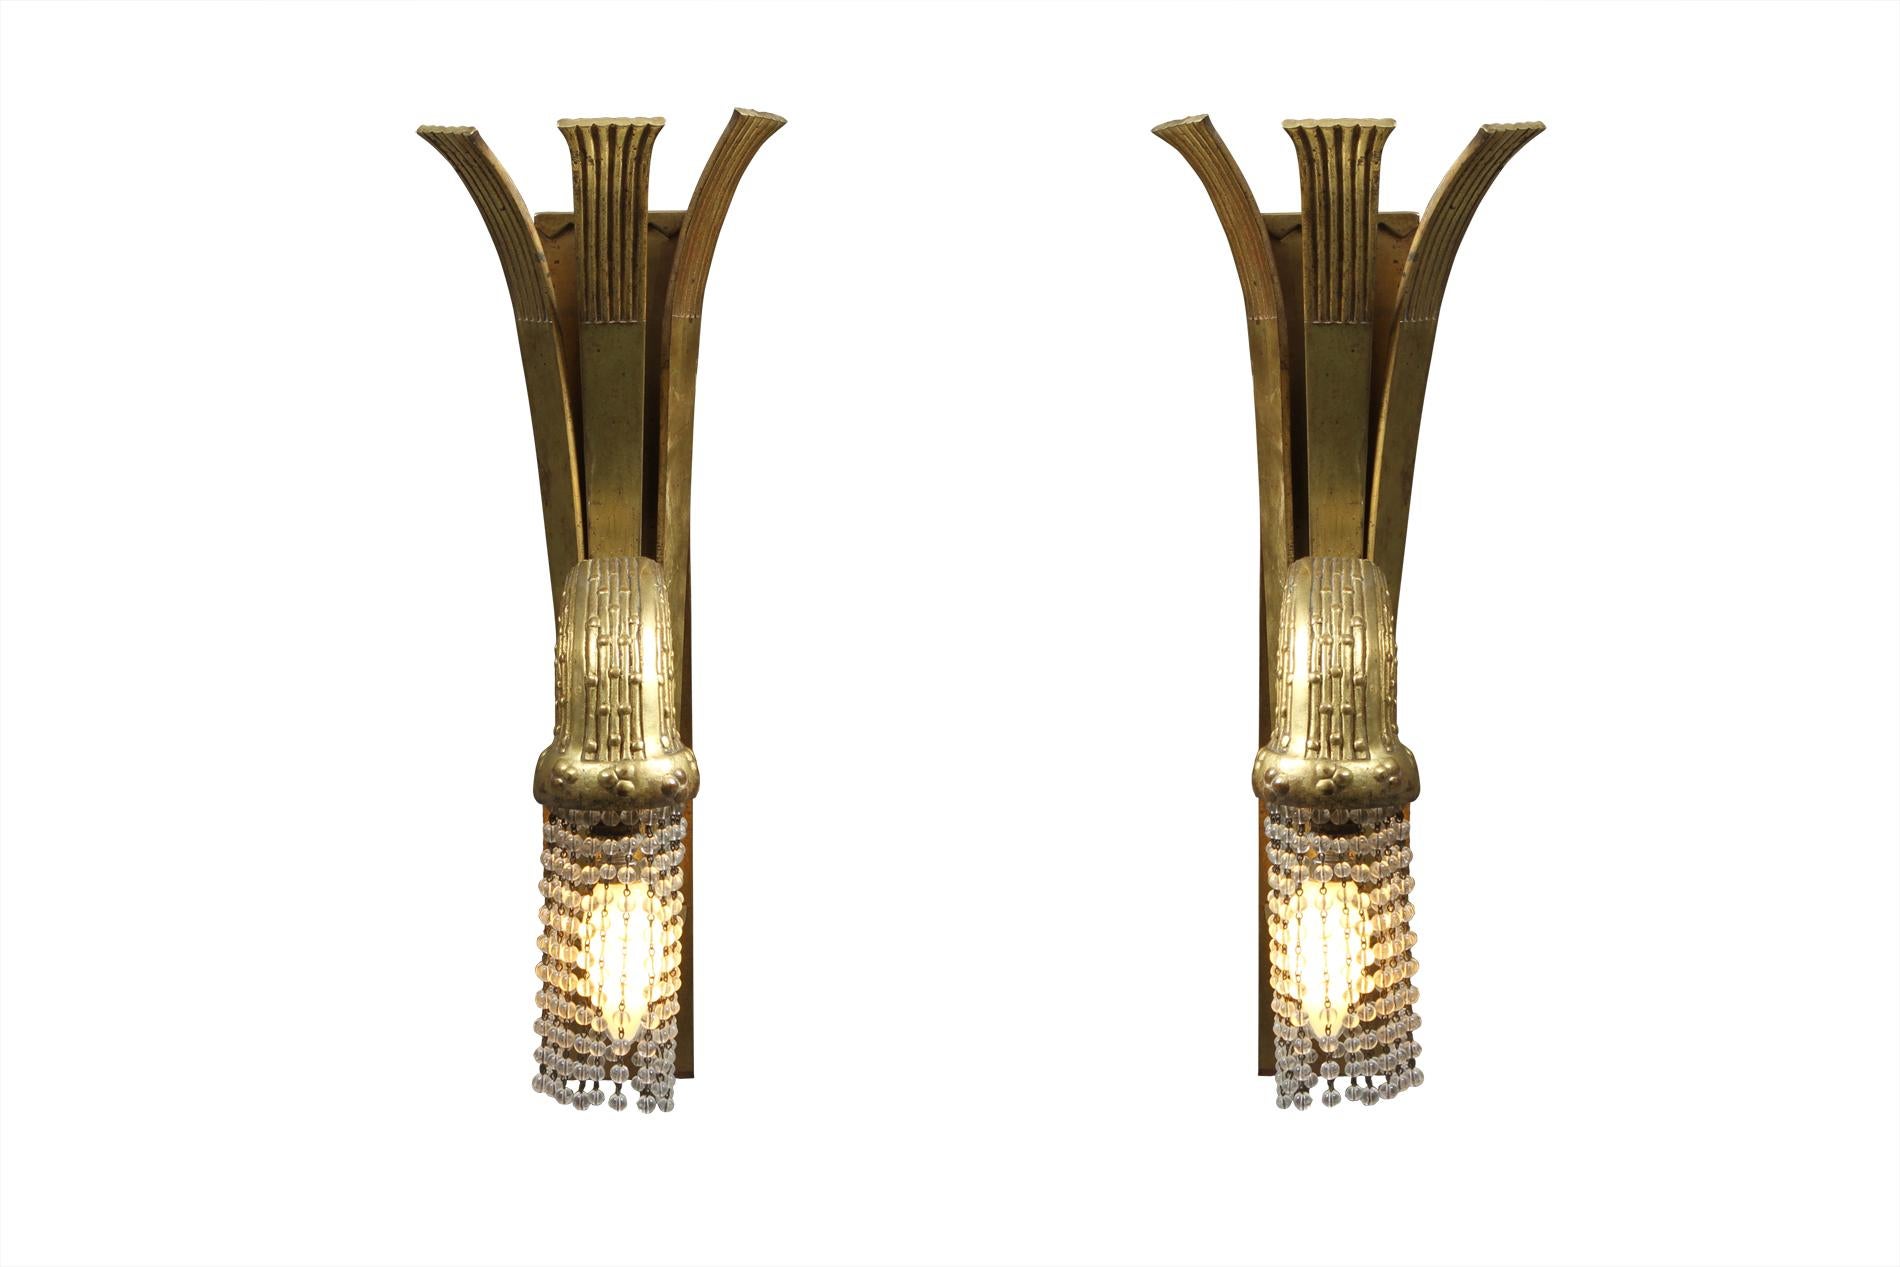 Pair of French Art Deco sconces in gold bronze and glass pearls by the designer Paul Follot, circa 1930. Original pieced that has been rewired. Paul Follot is an important figure of the Art Deco, he distinguished himself at the Salons des Artistes